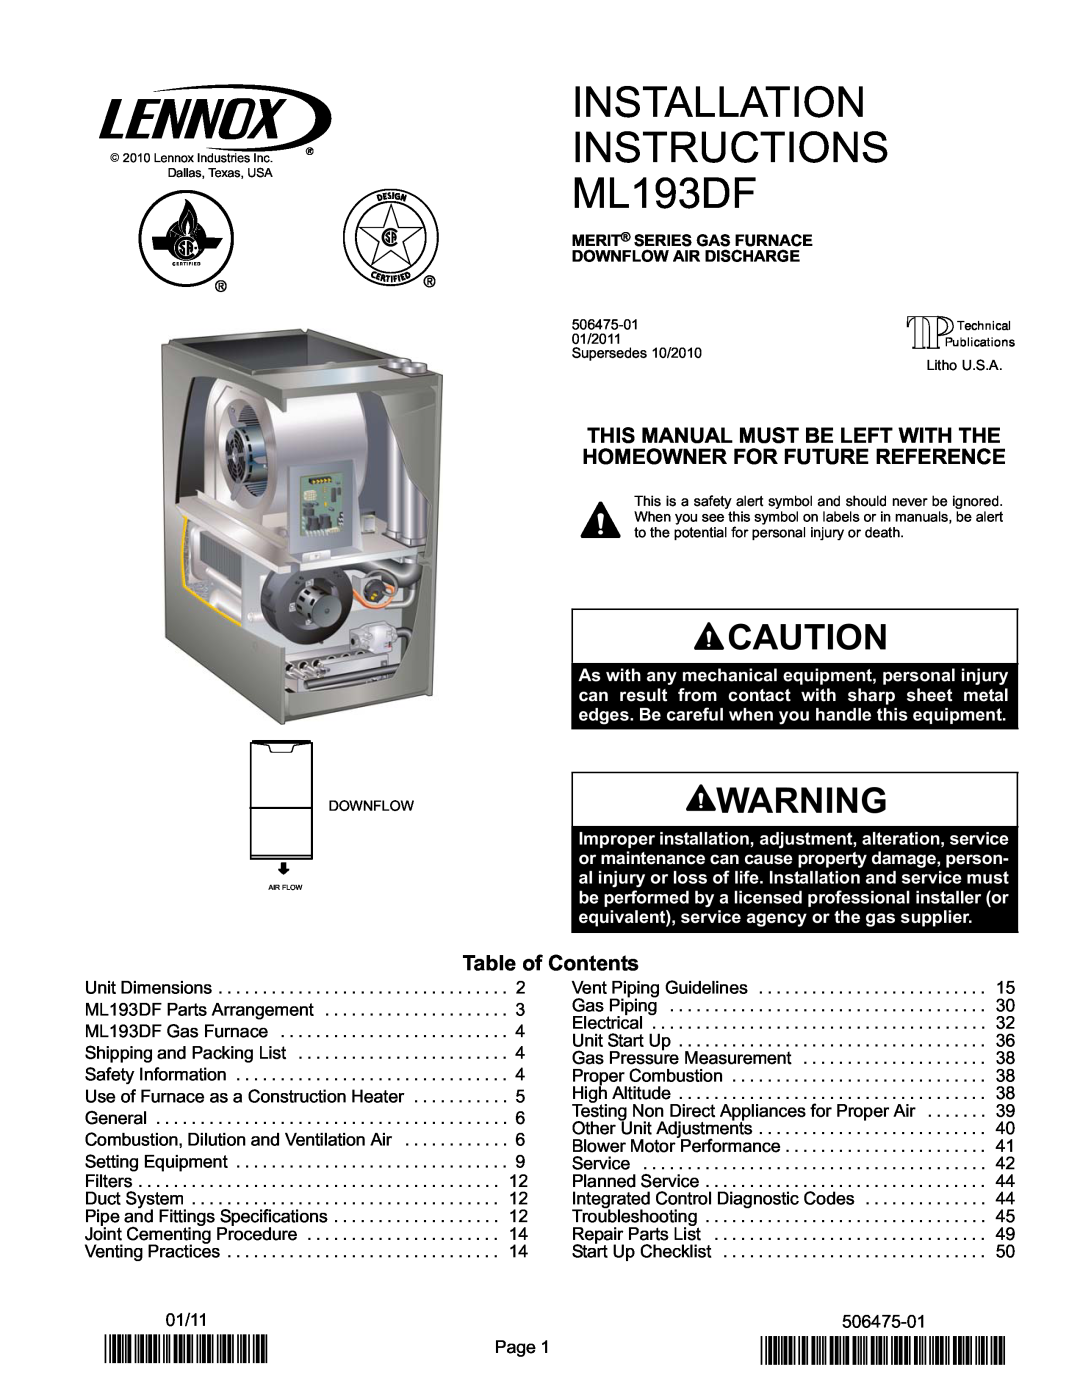 Lennox International Inc MERIT SERIES GAS FURNACE DOWNFLOW AIR DISCHARGE installation instructions Table of Contents 